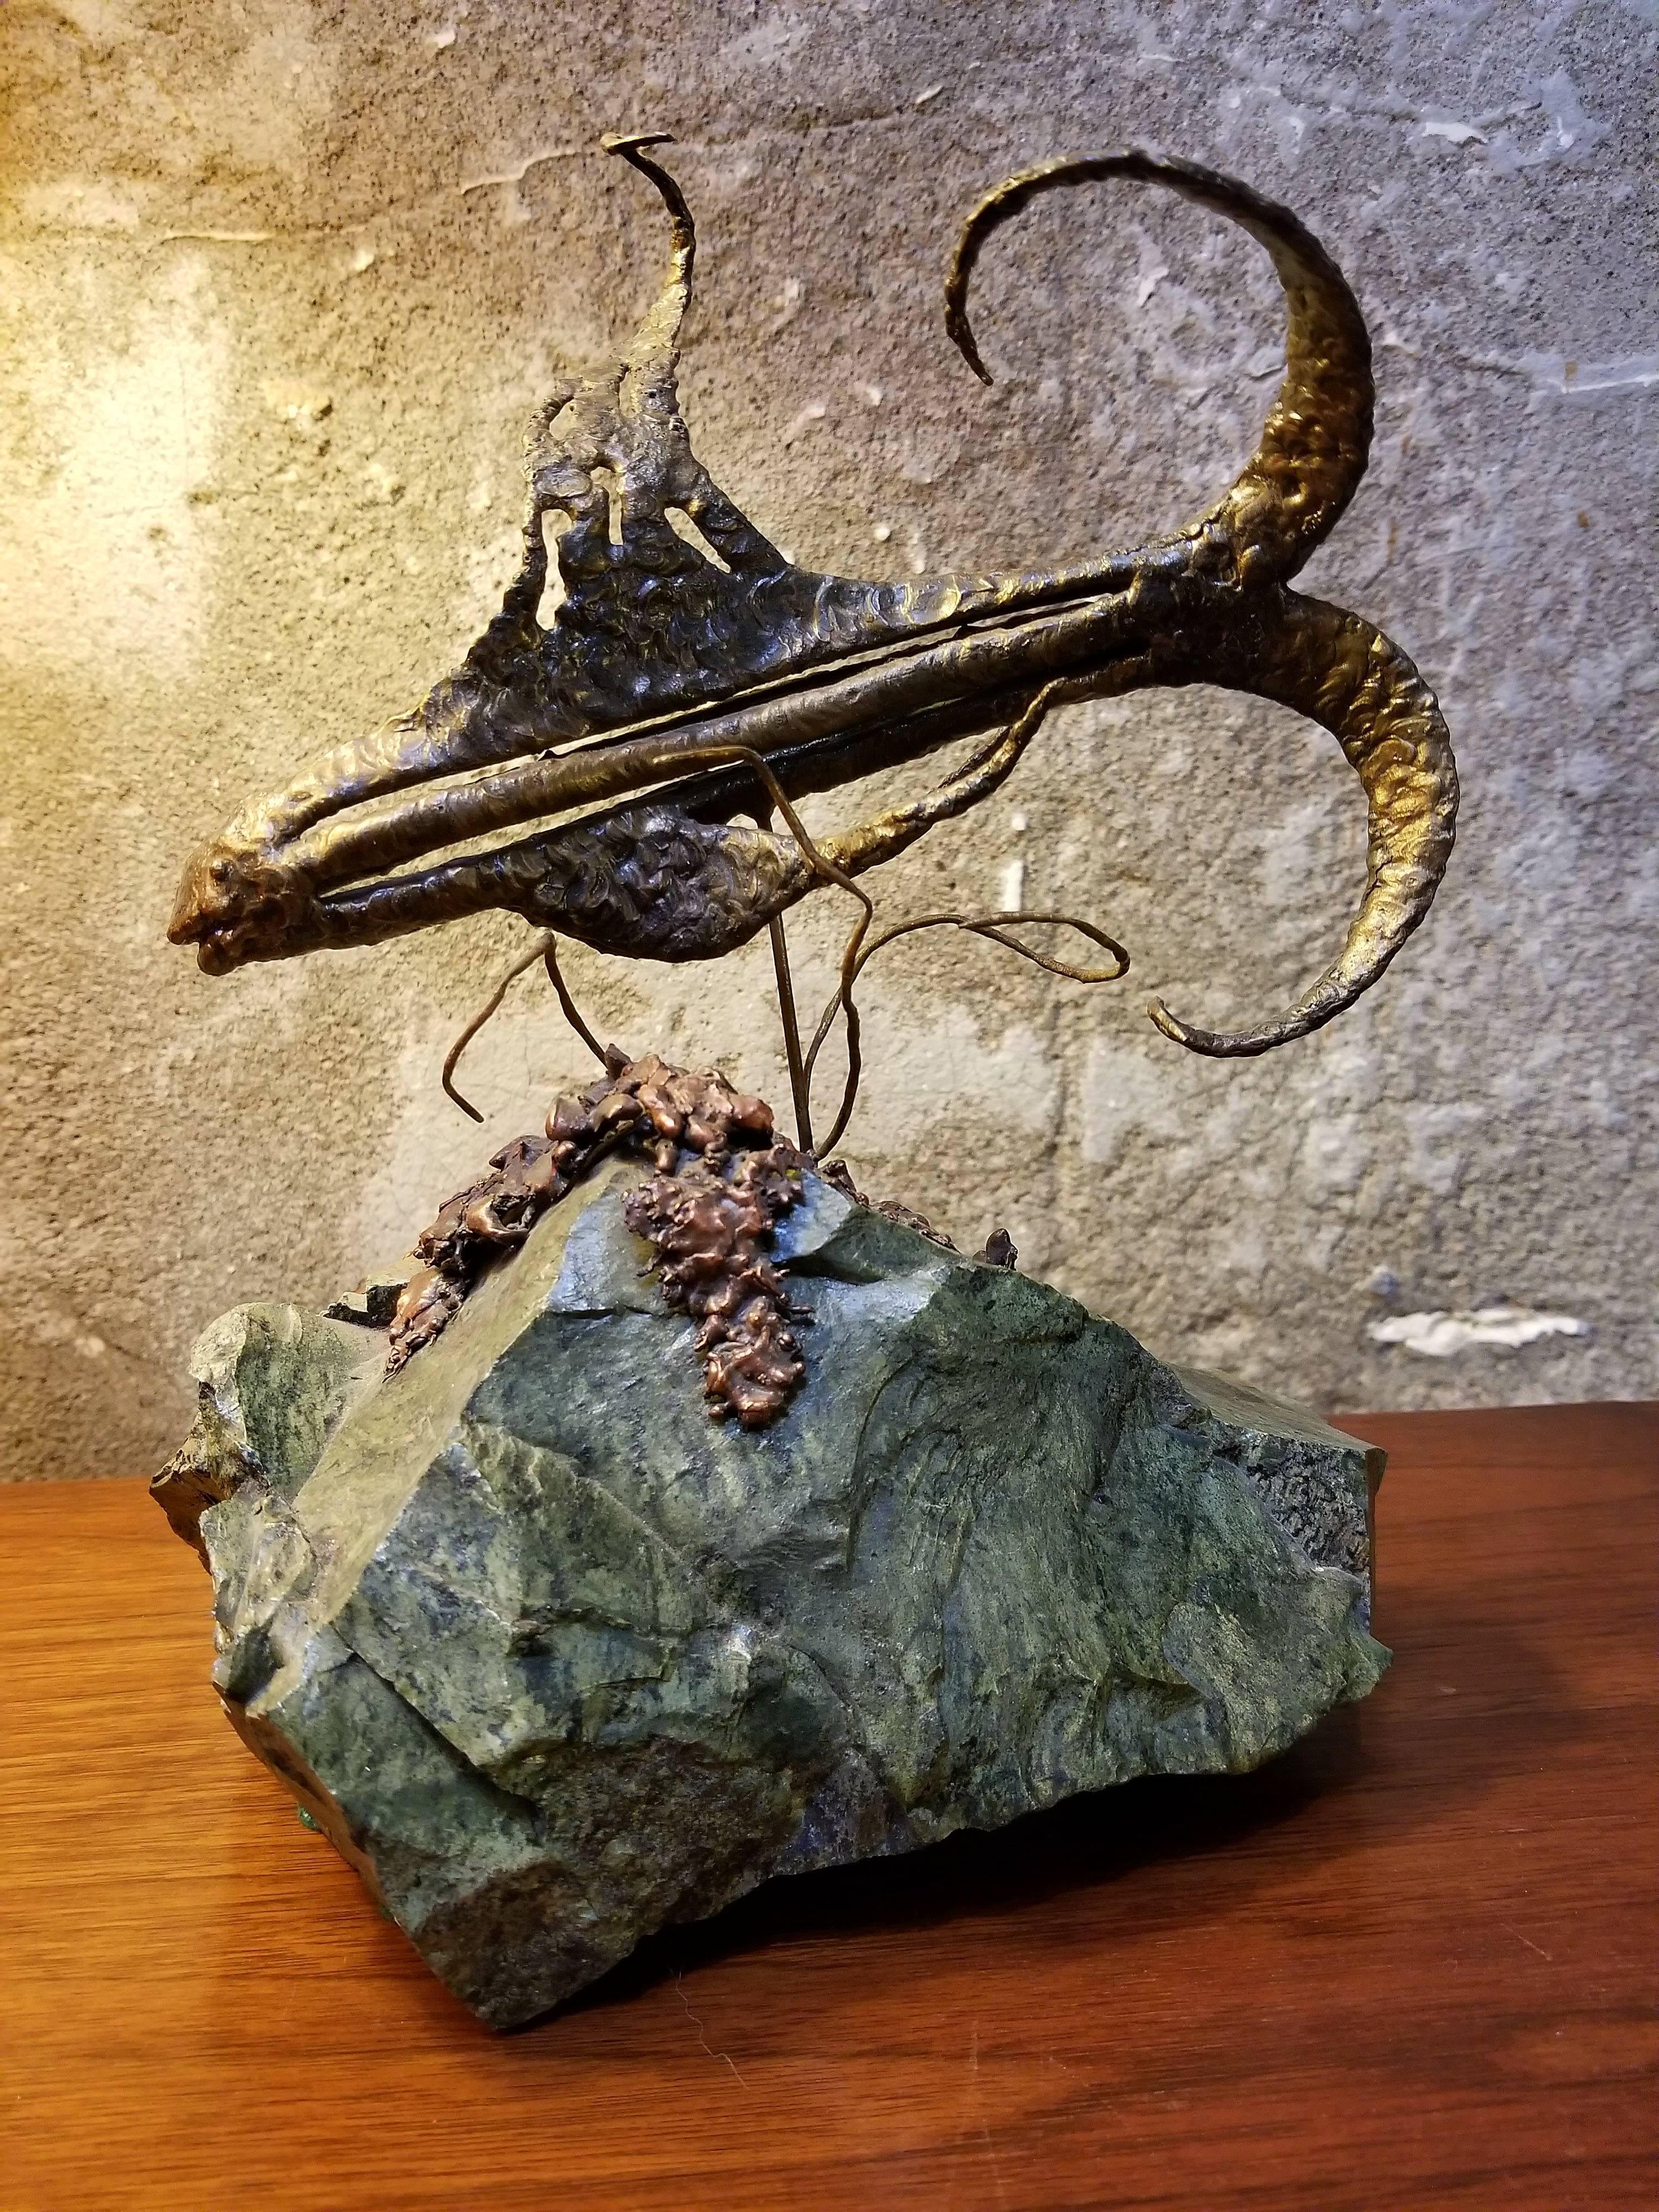 Brutalist Mid-Century Modern bronze sculpture of a stylized fish or serpent. Bronze and copper on a stone mount. Signed and dated 1972.